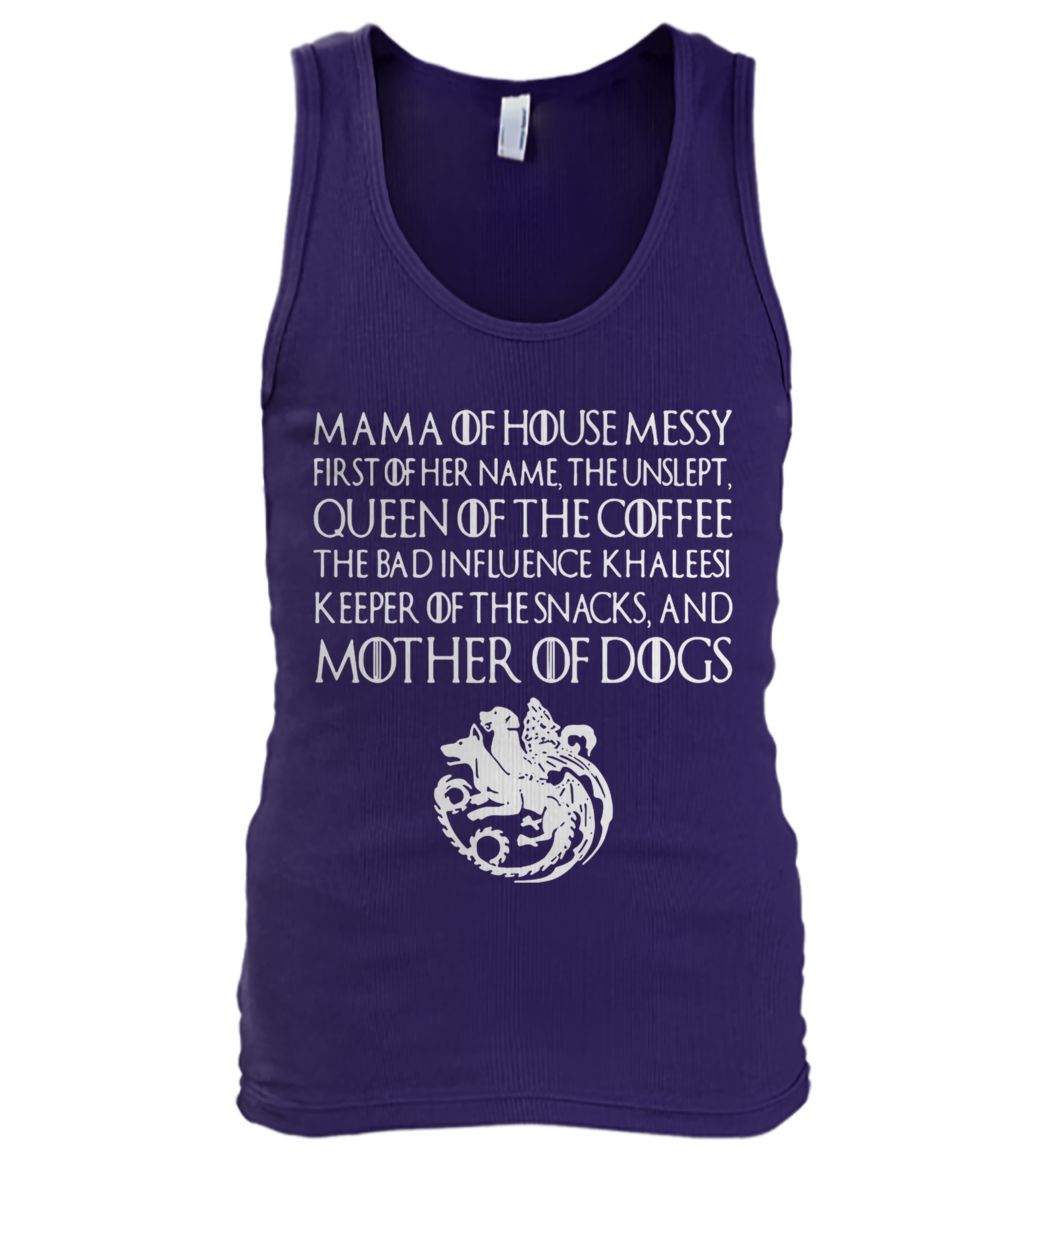 Game of thrones mama of house queen of the coffee mother of dogs men's tank top